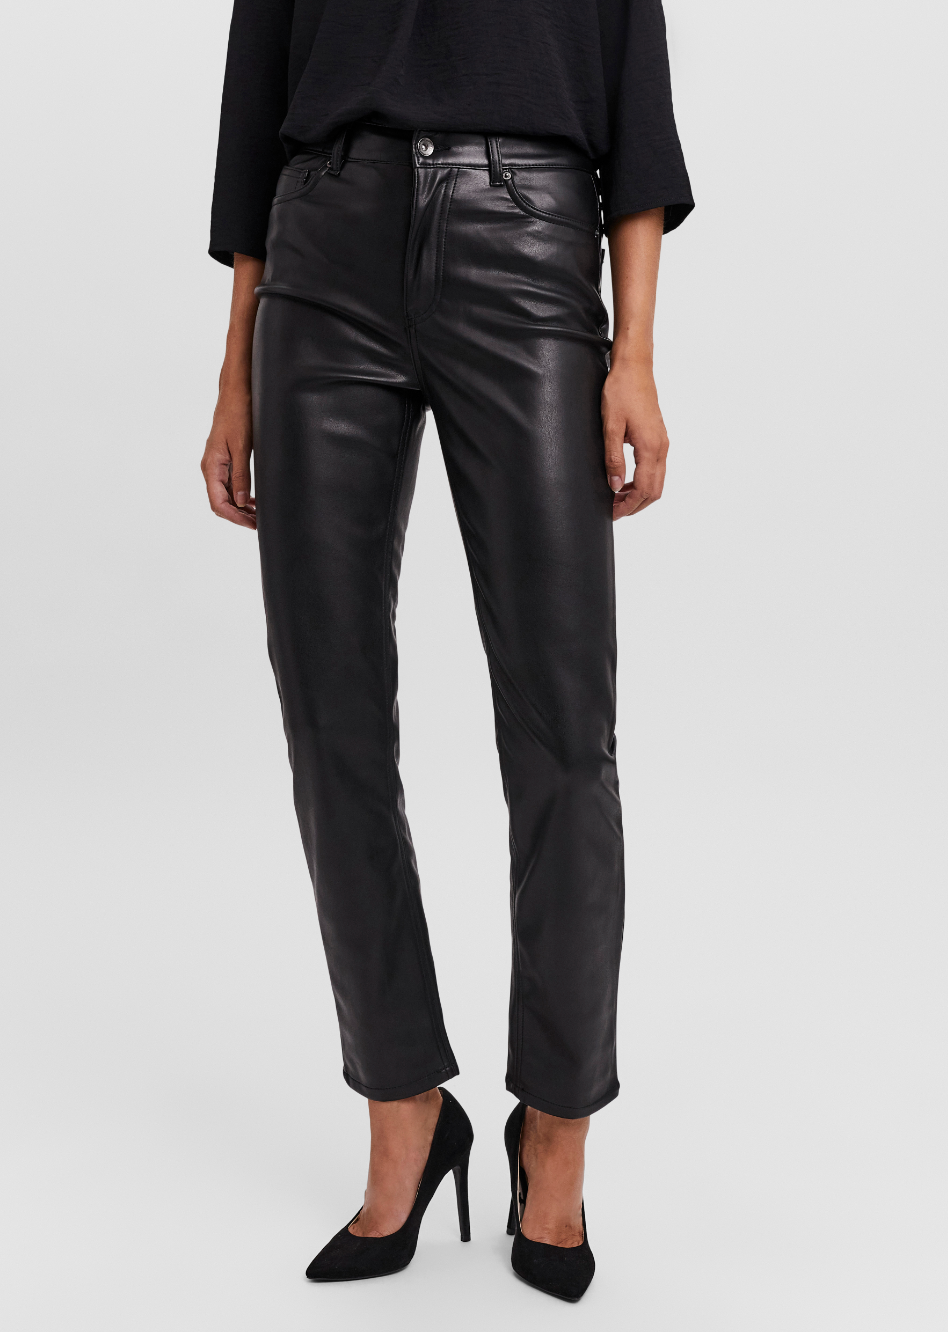 Black Leather Pants Trousers